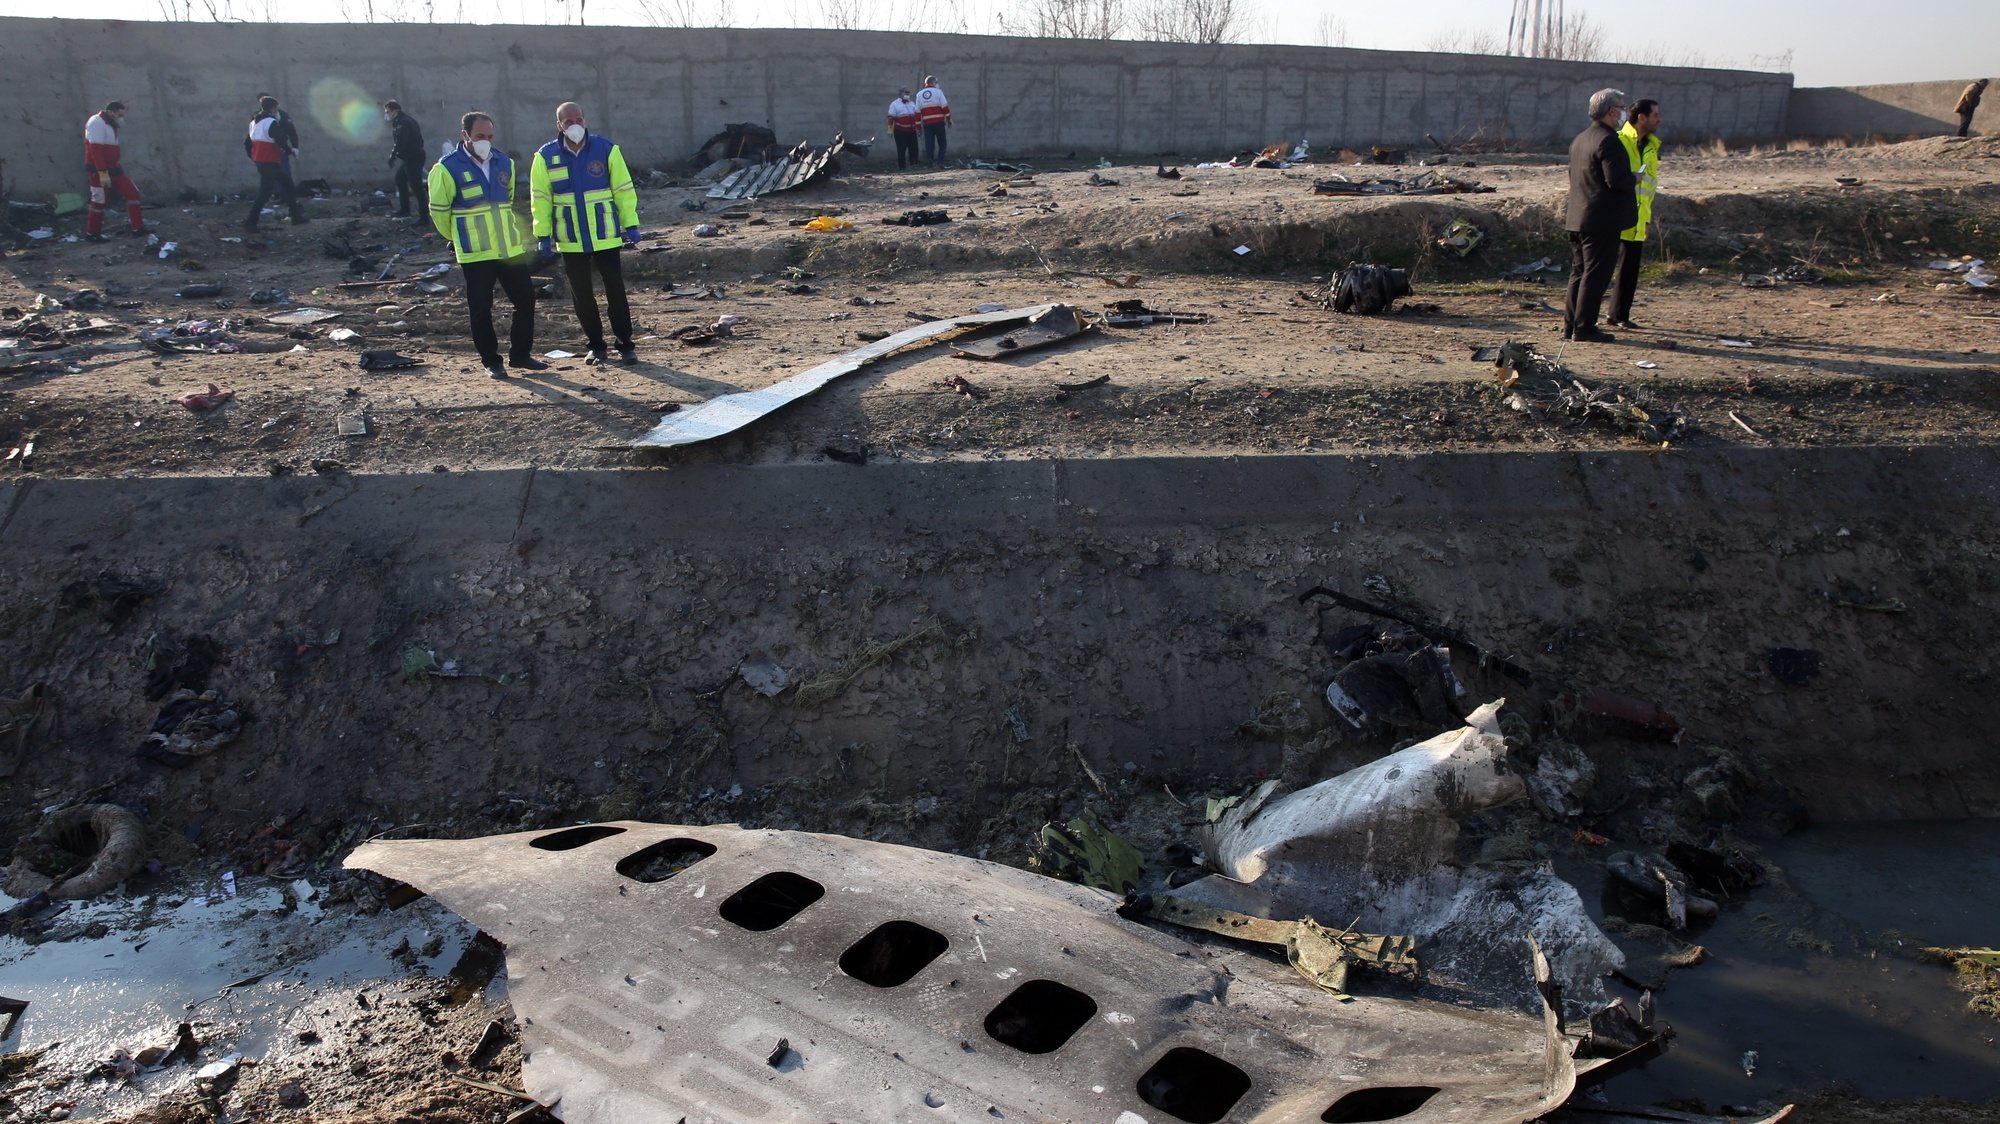 epa08553428 (FILE) - Officials stand near the wreckage after an Ukraine International Airlines Boeing 737-800 carrying 176 people crashed near Imam Khomeini Airport in Tehran, killing everyone on board; in Shahriar, Iran, 08 January 2020 (reissued 18 July 2020). Media reports state on 18 July 2020 that Iran has sent to France the black box of the Ukrainian passenger plane, which was accidentally downed by Iranian armed forces on 08 January 2020 near Tehran, killing all 176 people aboard, after mistaking it for an incoming missile. The black box will be read in Paris on 20 July 2020, media added. *** Local Caption *** 55750844